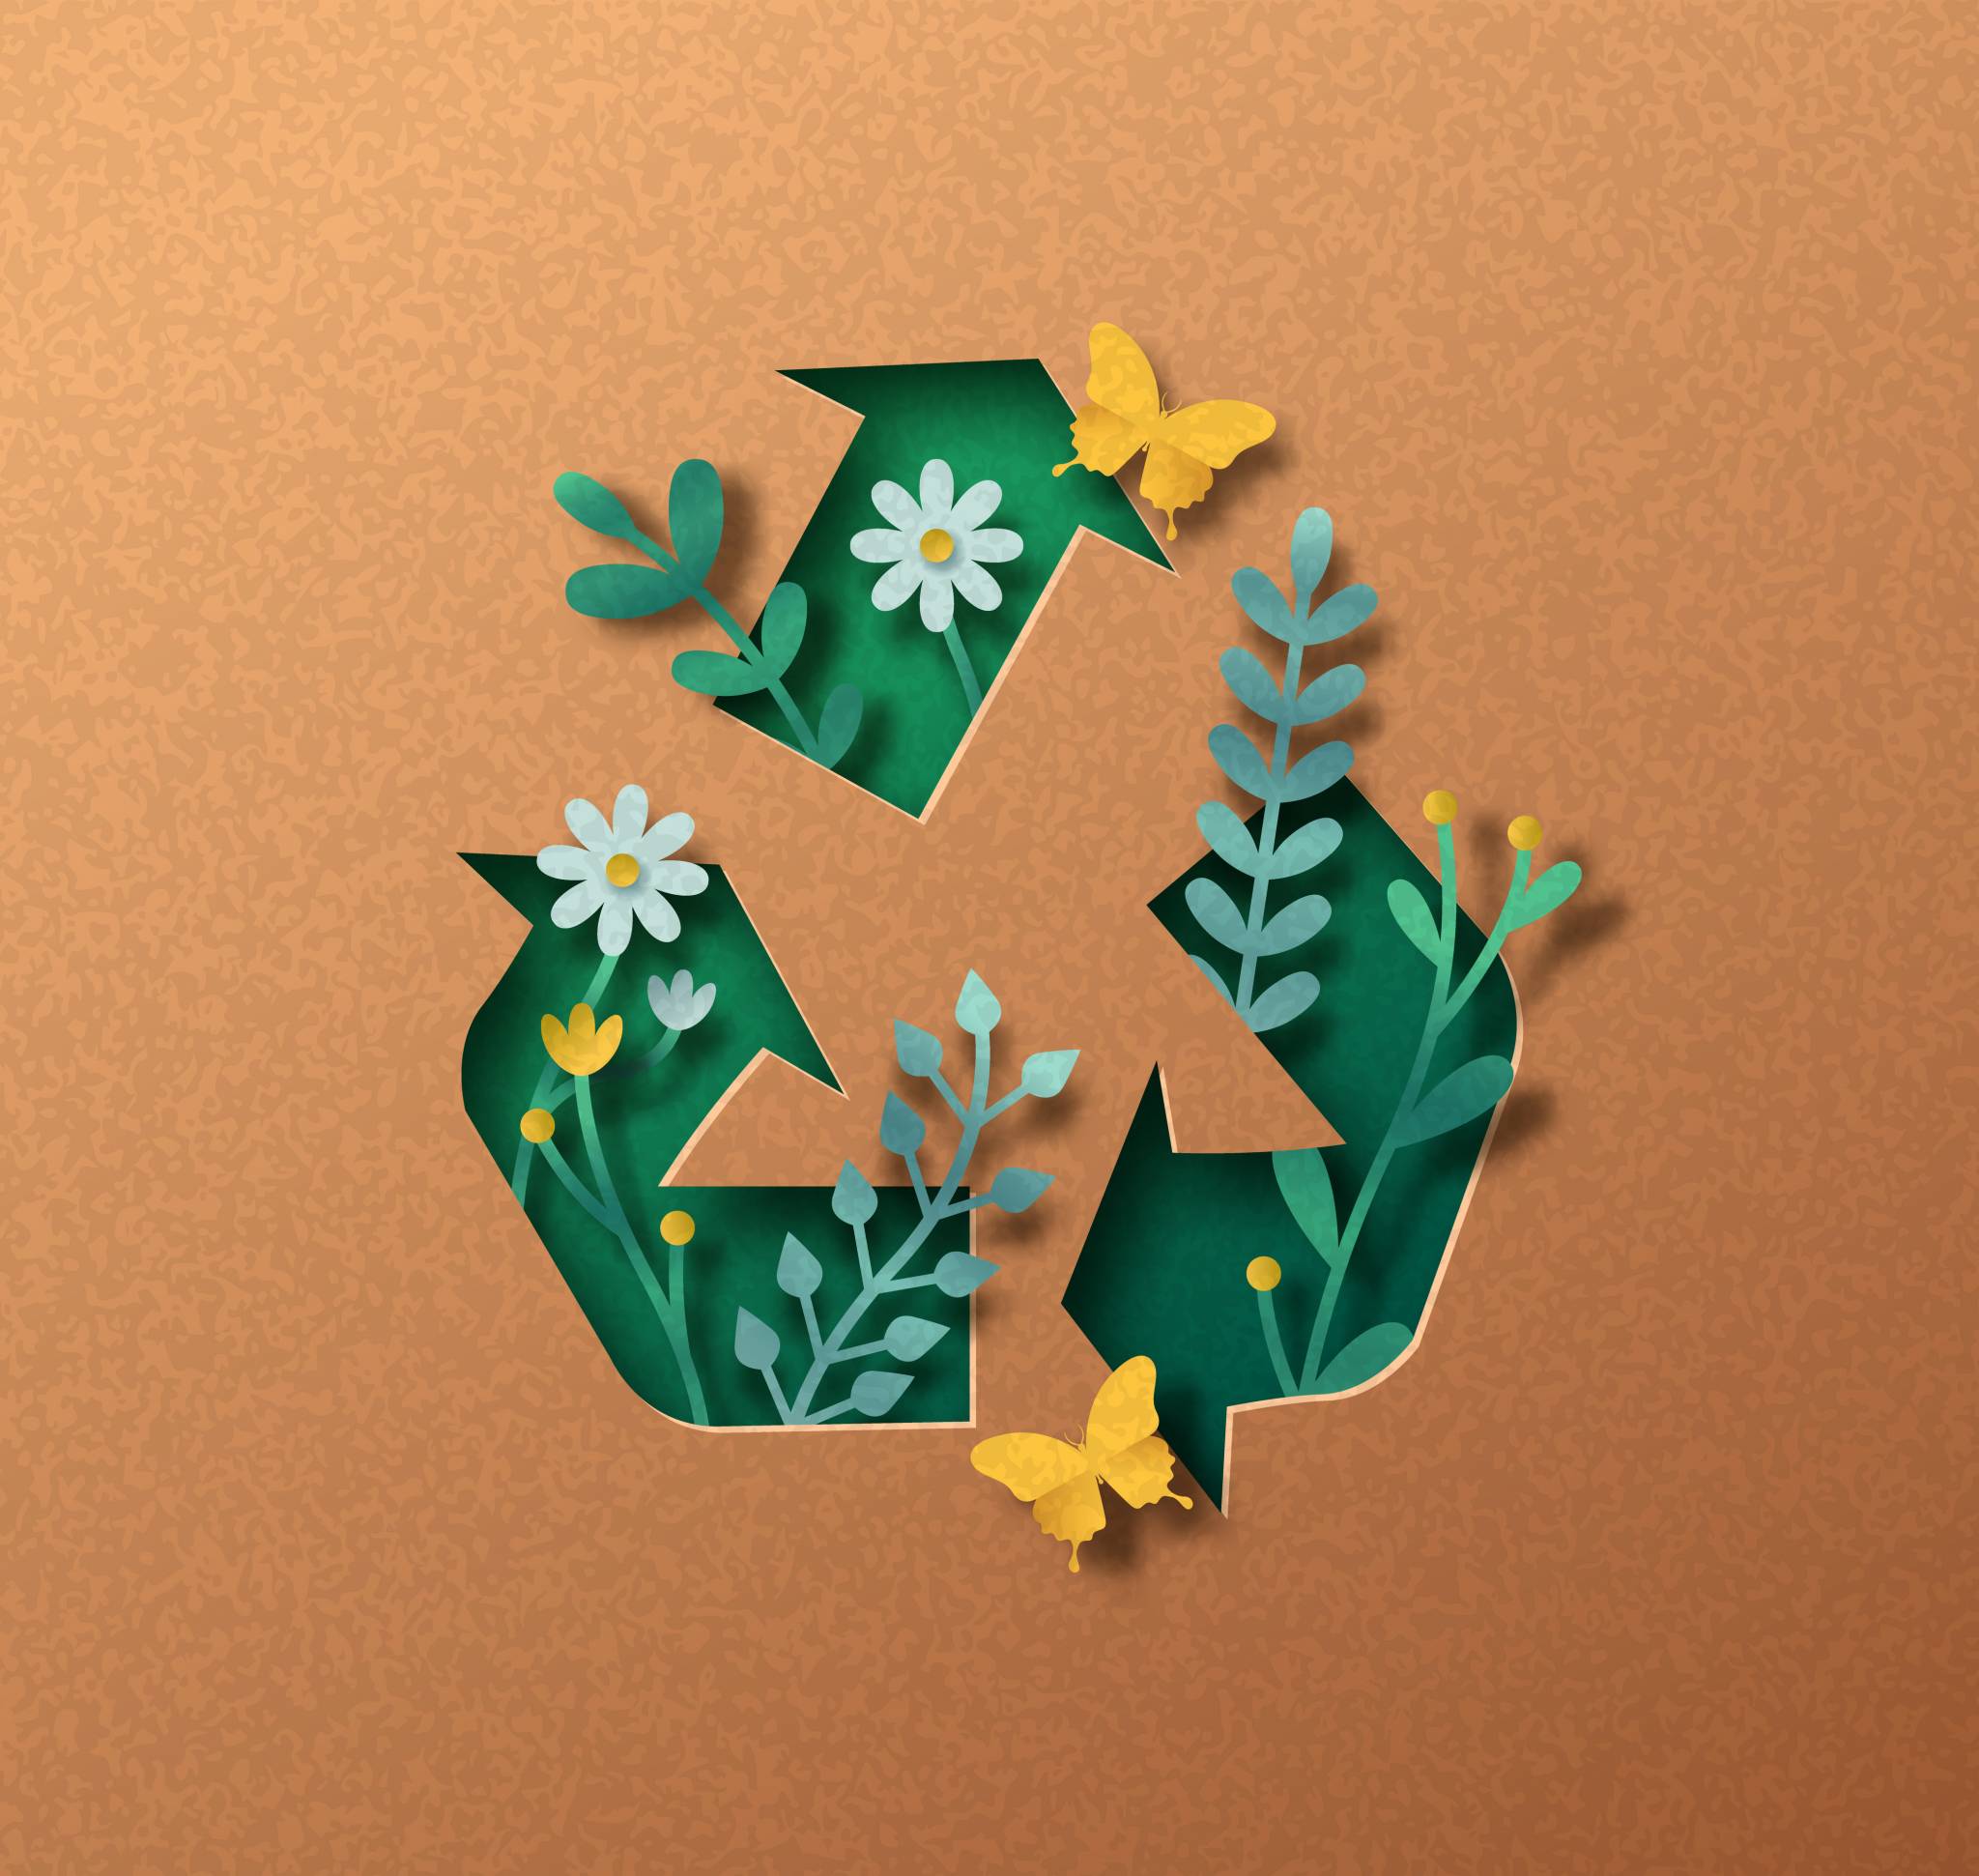 Paper art recycling symbol with floral and butterfly motifs on a brown background, promoting eco-friendly practices.